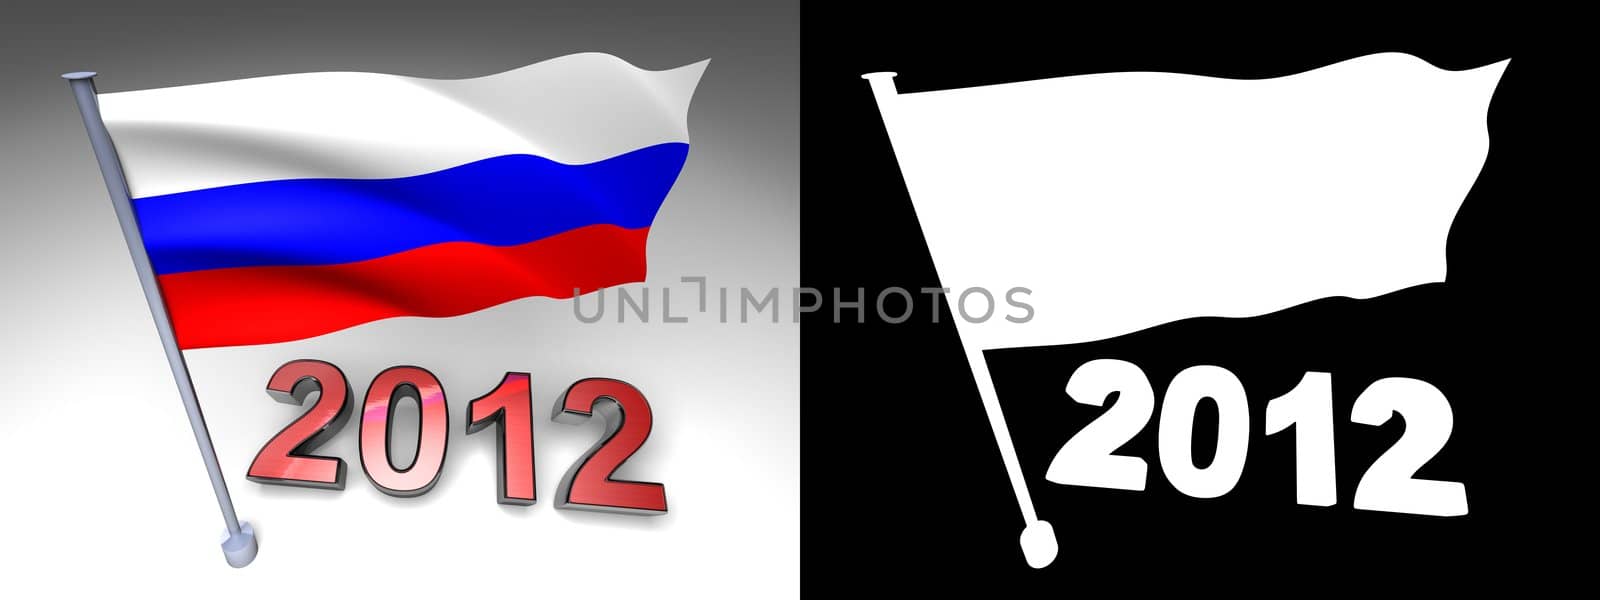 2012 design and Russia flag on a pole by shkyo30